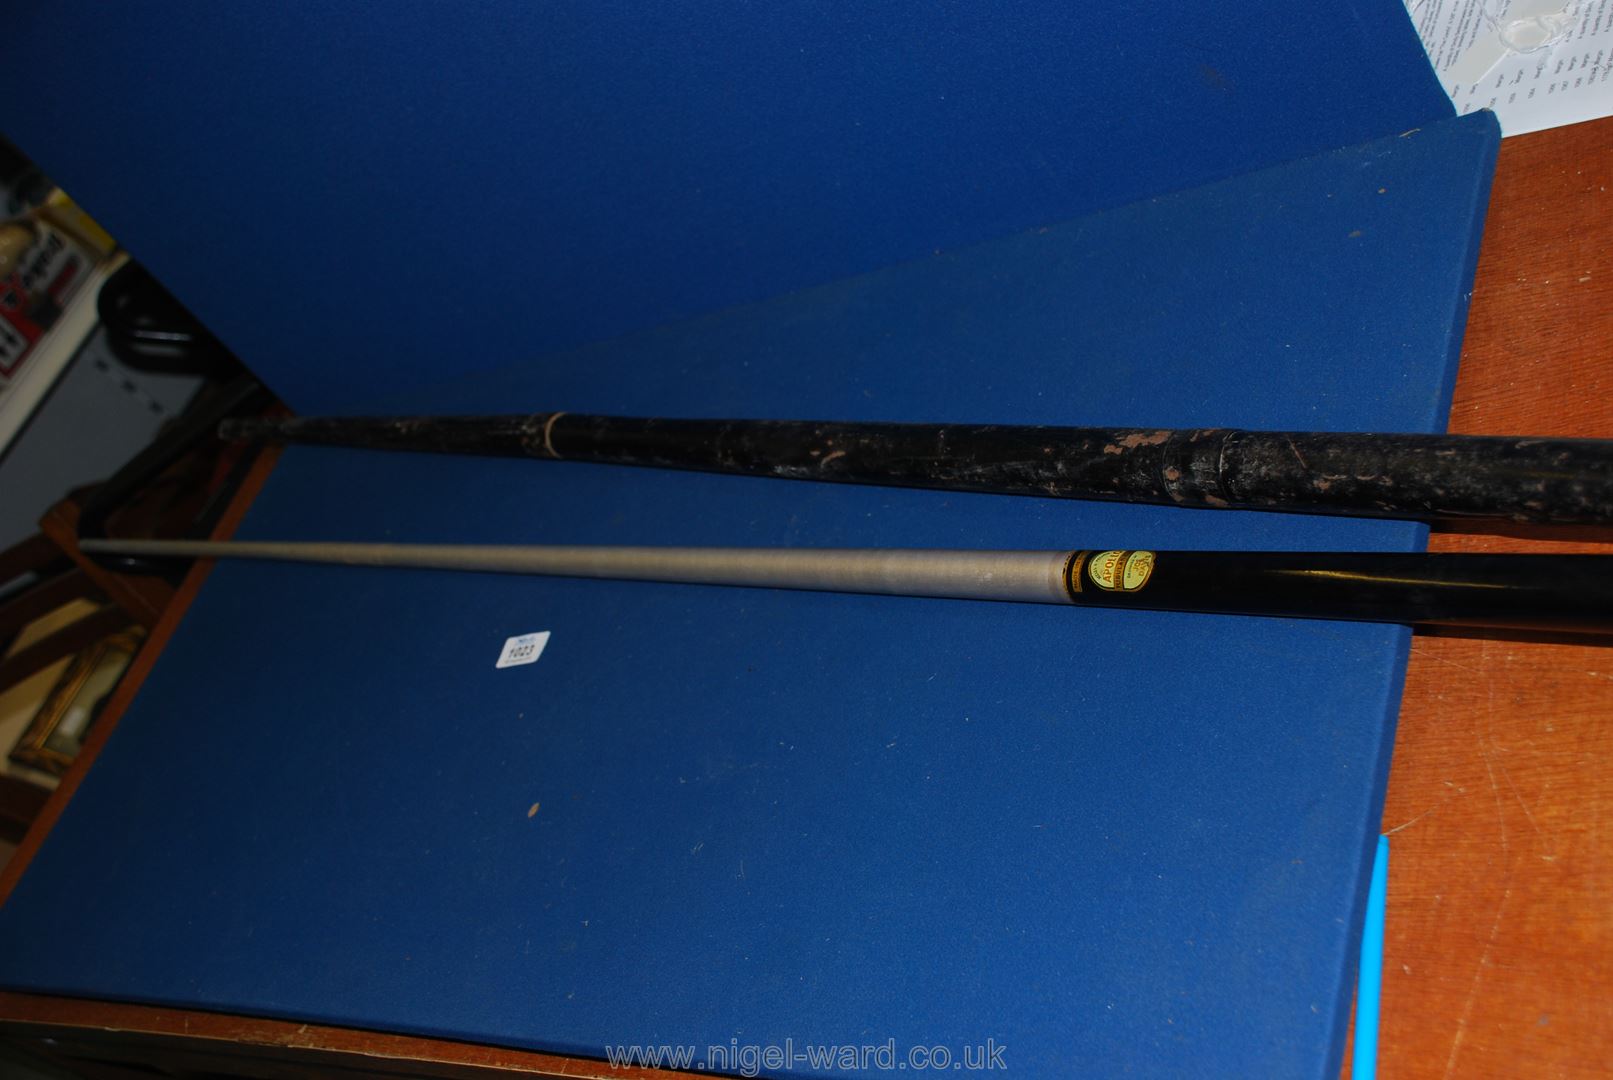 An English made Tubular Cue by Apollo Accles and Pollock in a metal sleeve.